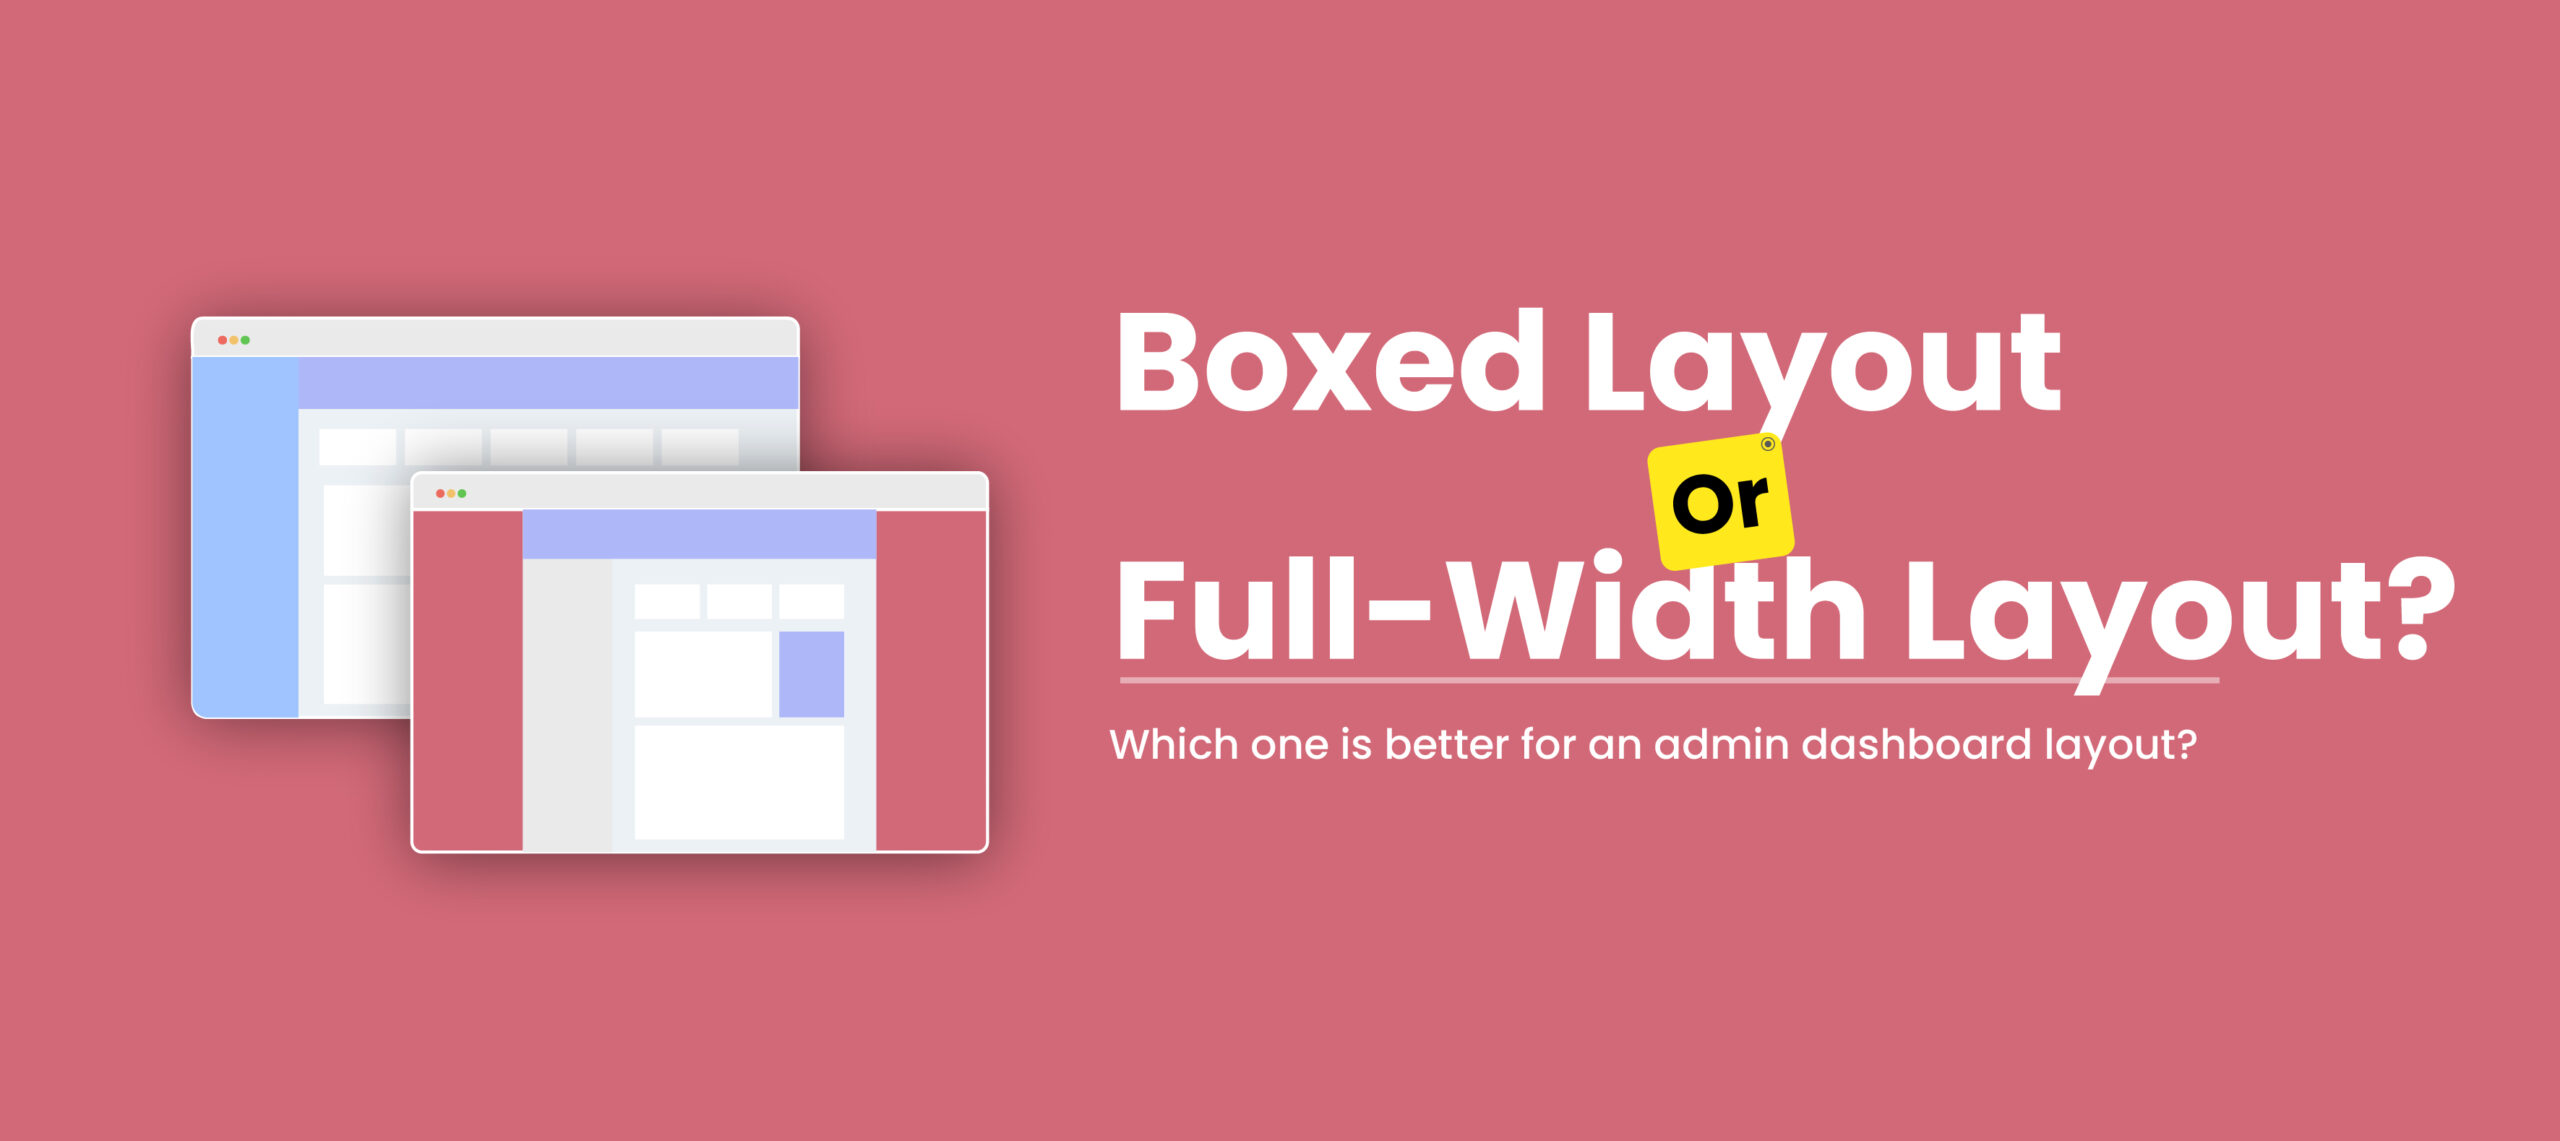  Boxed Layout or Full-Width Layout? Which one is better for an admin dashboard layout?